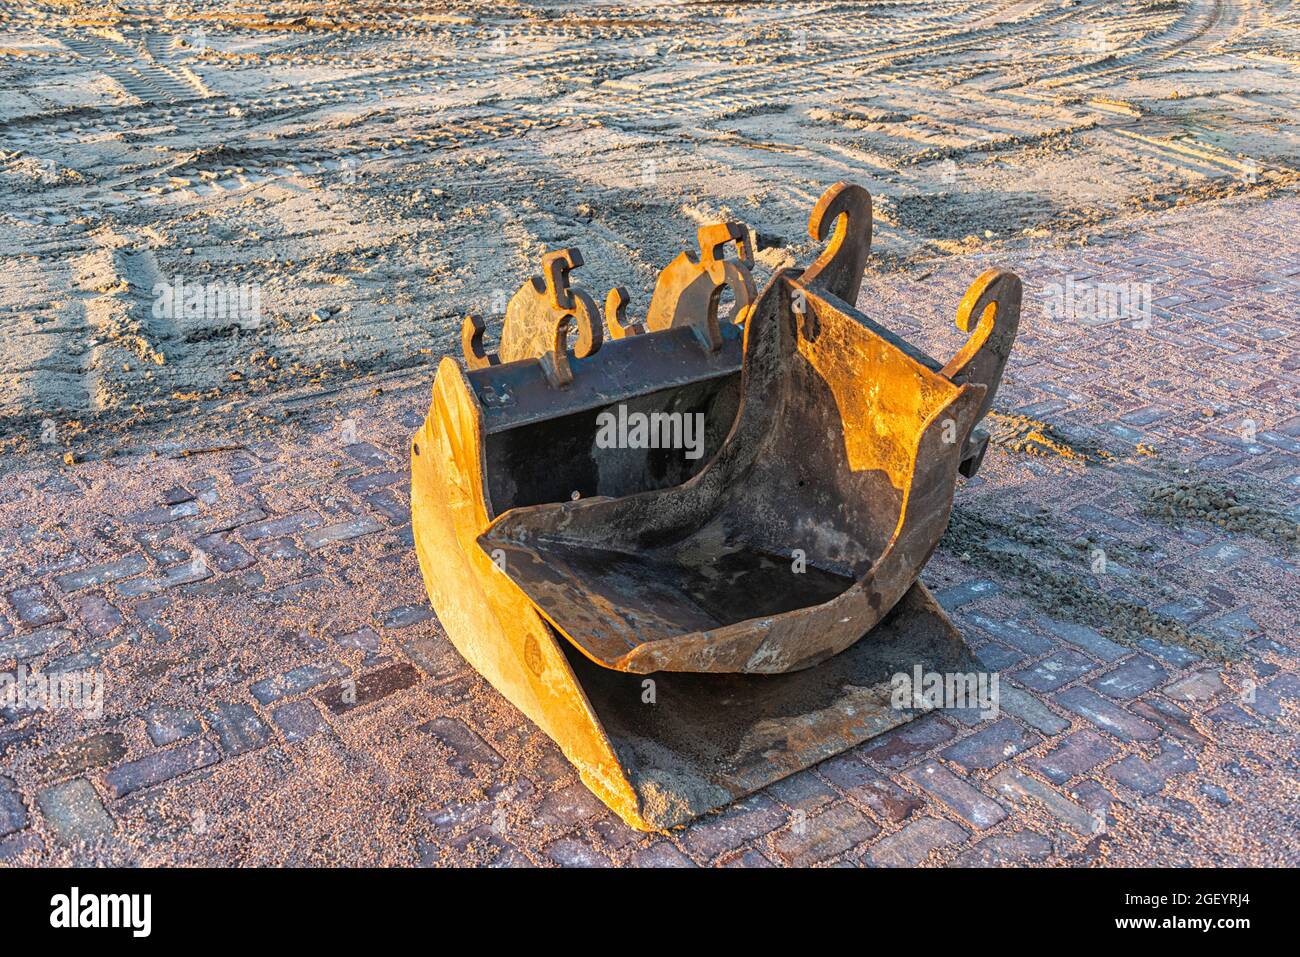 two separate shovel buckets from a shovel on a construction site on a construction site Stock Photo